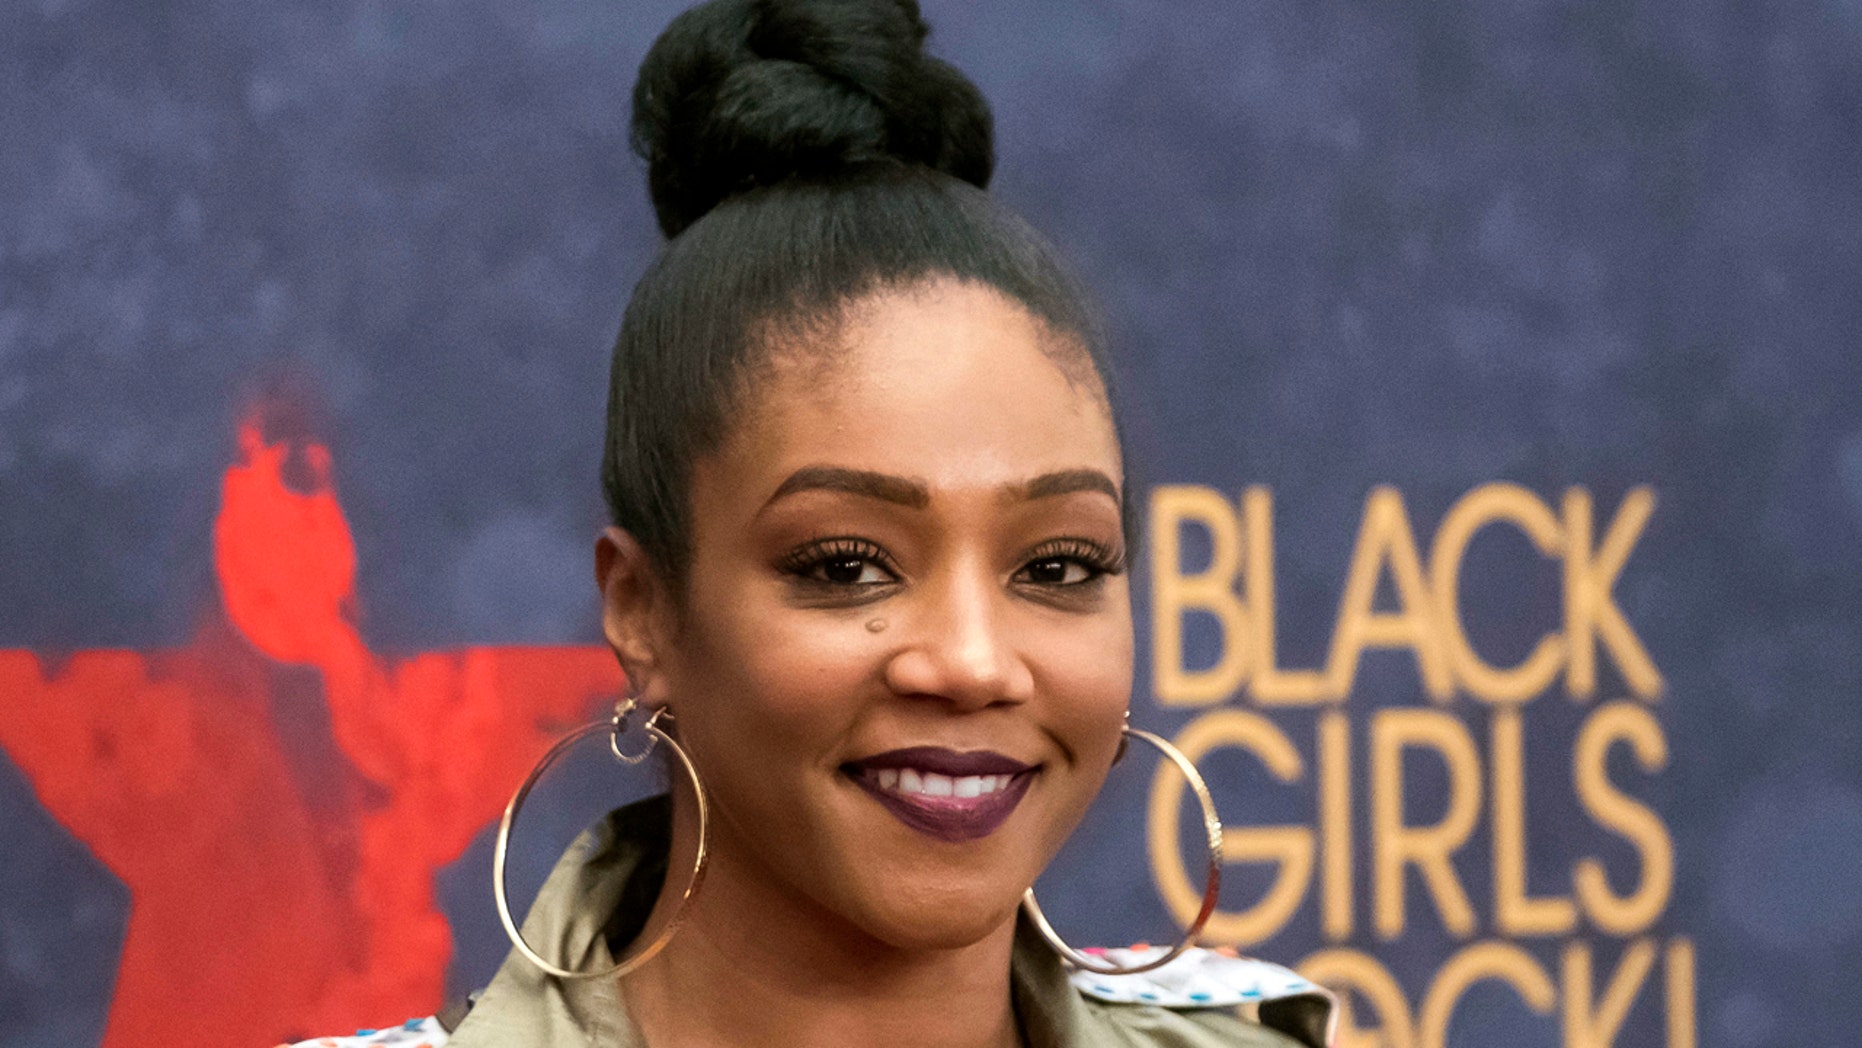 Tiffany Haddish vows to wear fur every day until police 